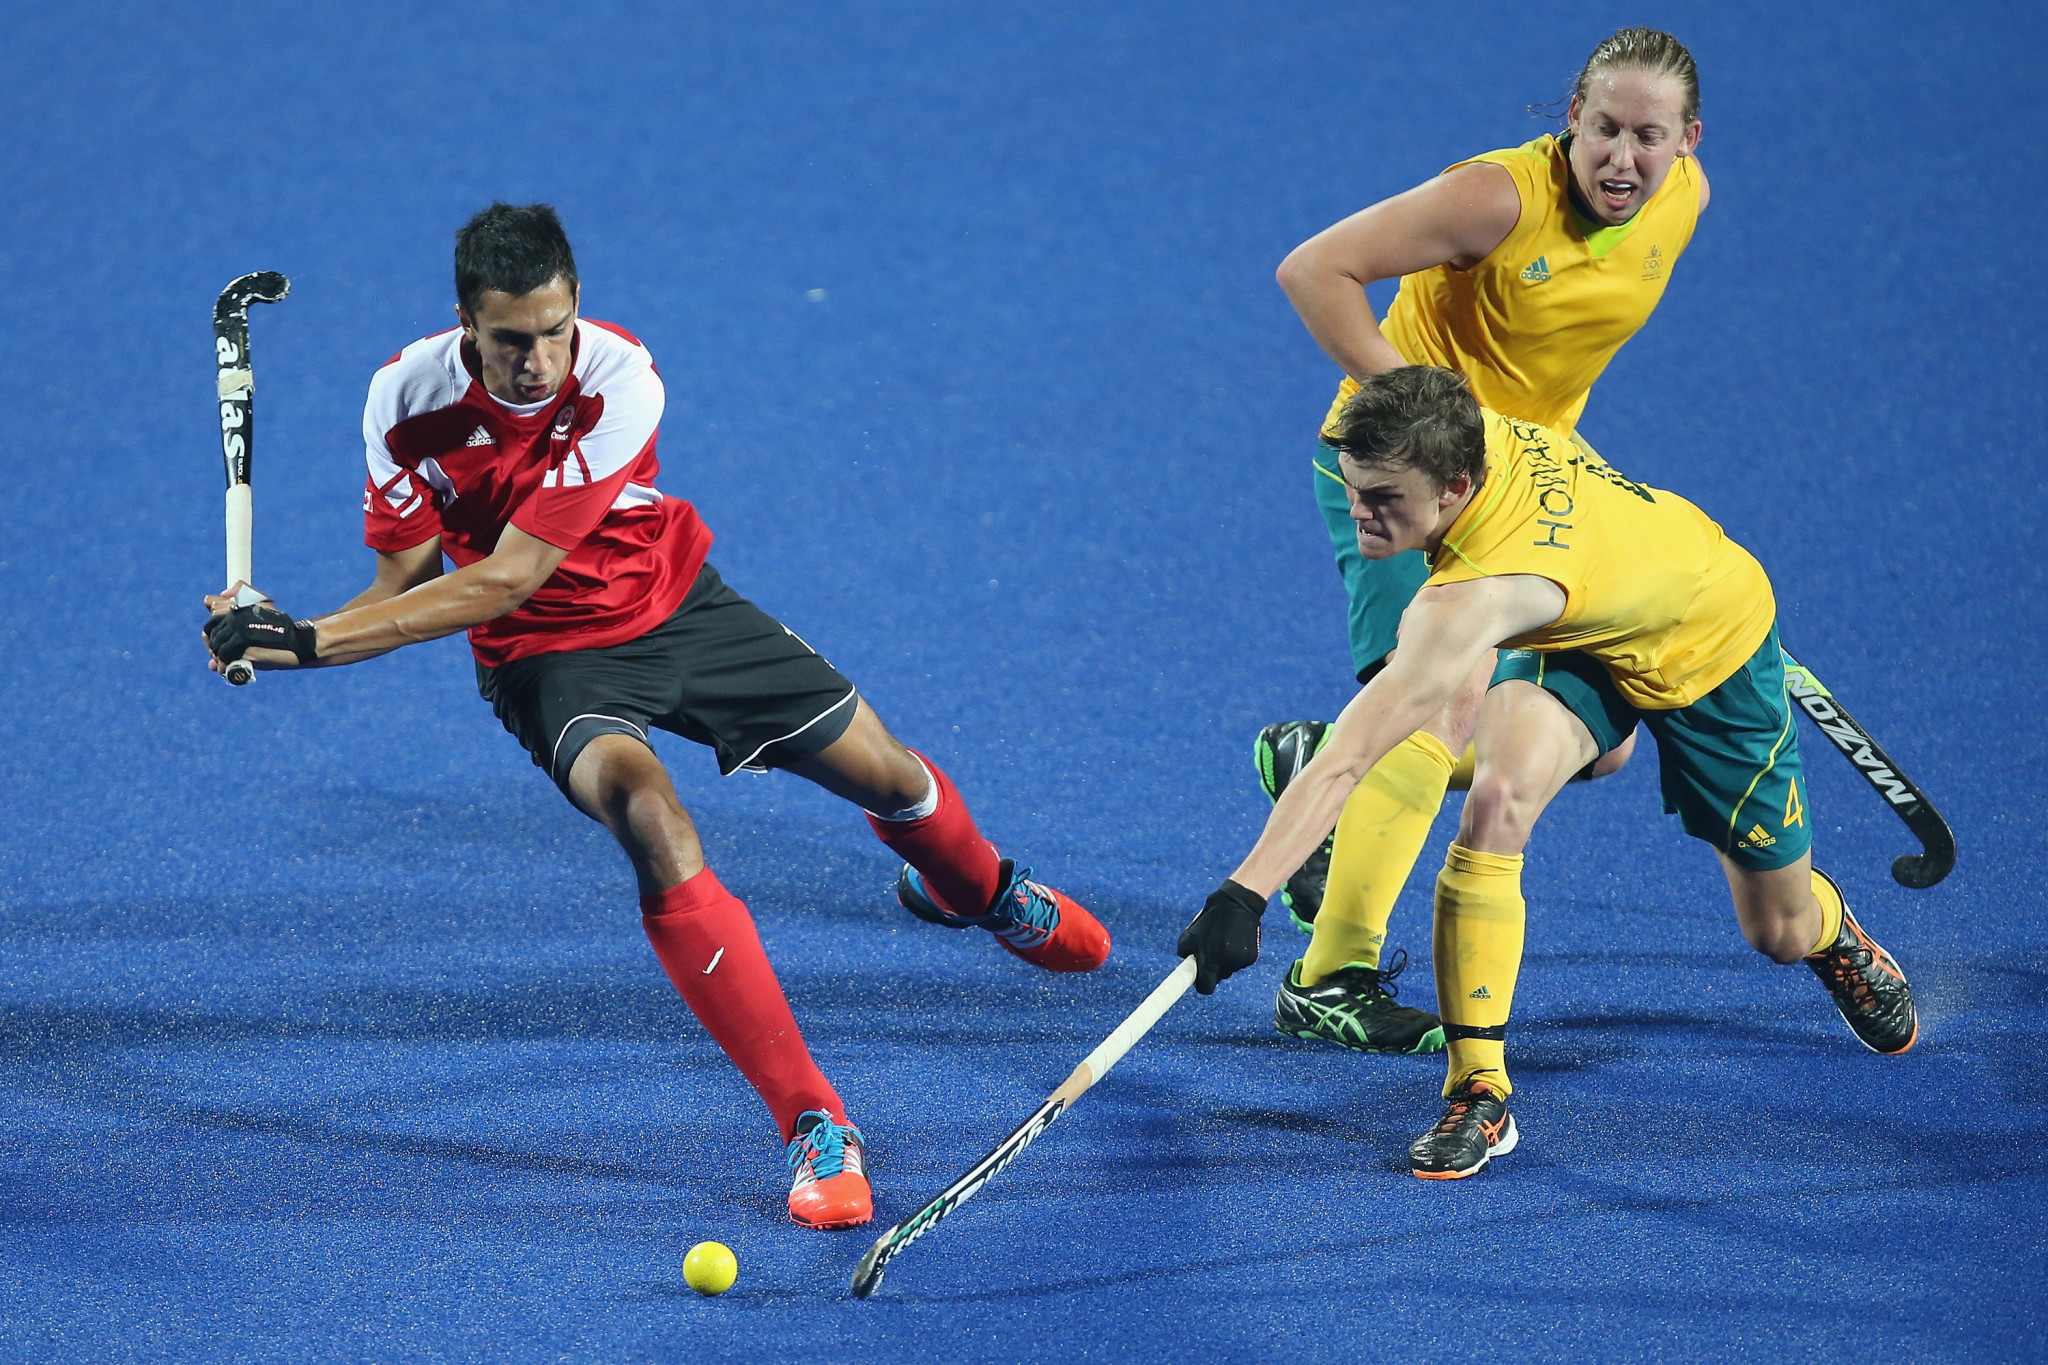 Hockey5s has featured at the Youth Olympic Games ©Getty Images